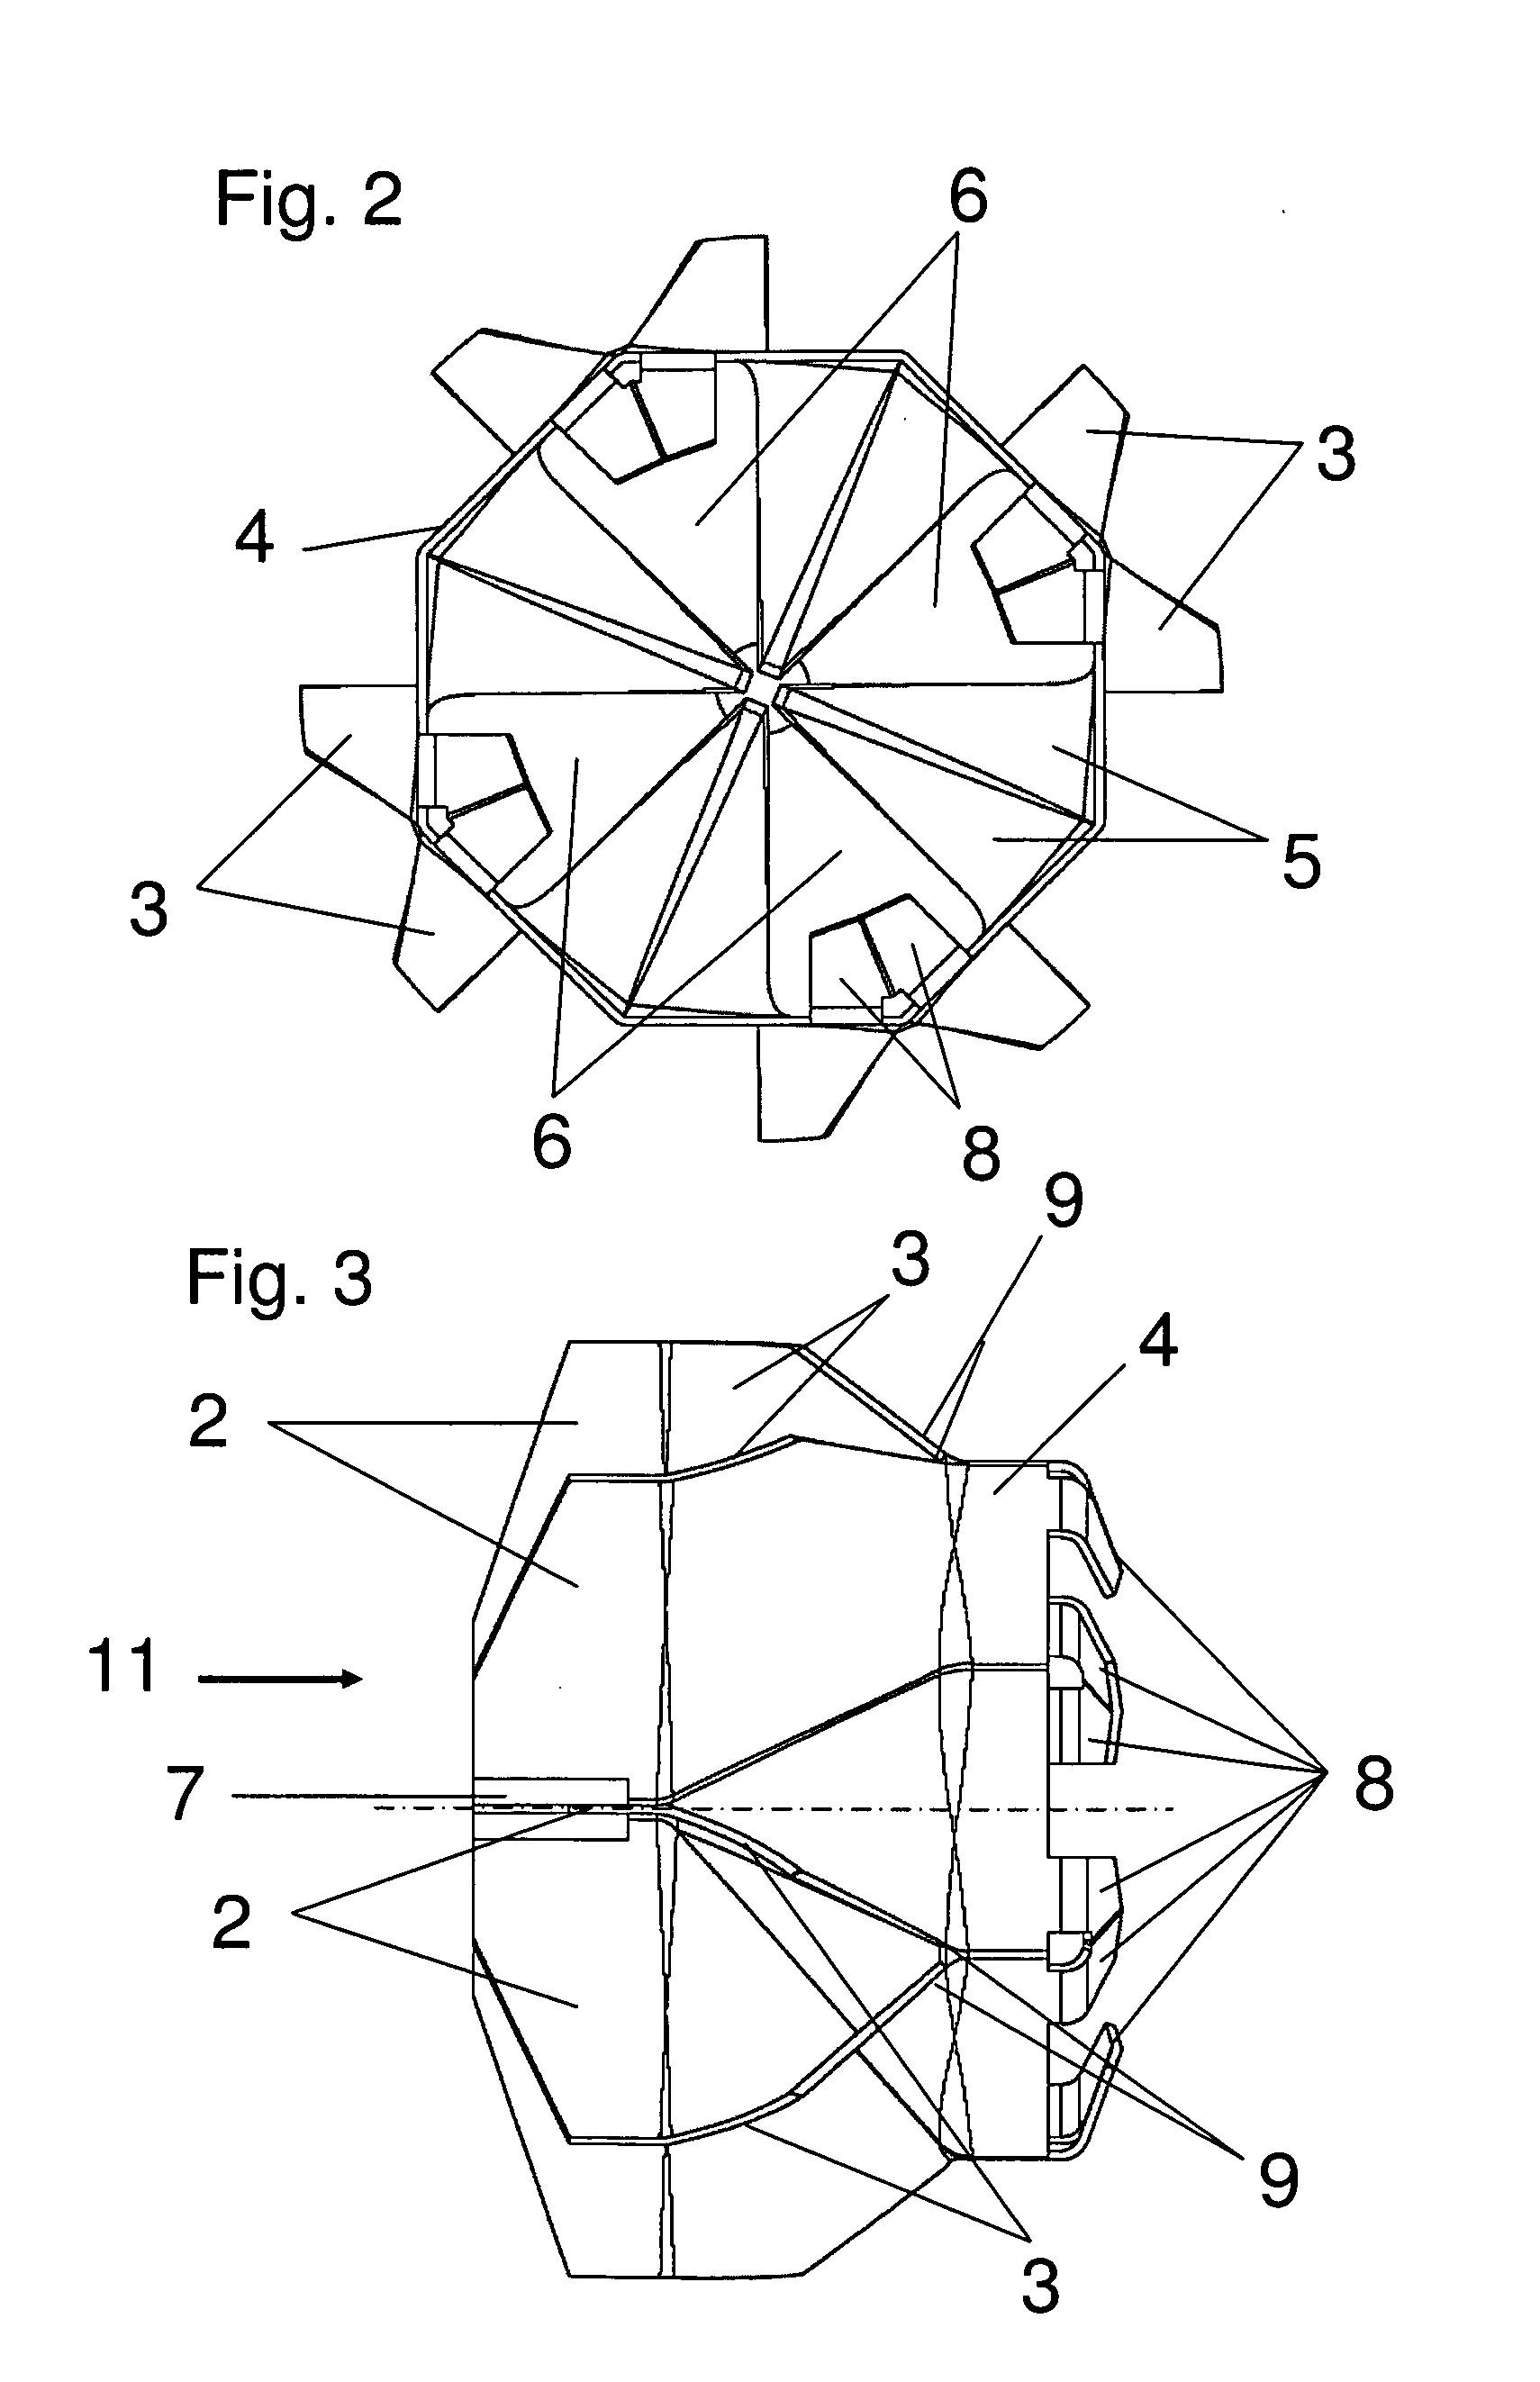 Static mixer for an exhaust gas system of an internal combustion engine